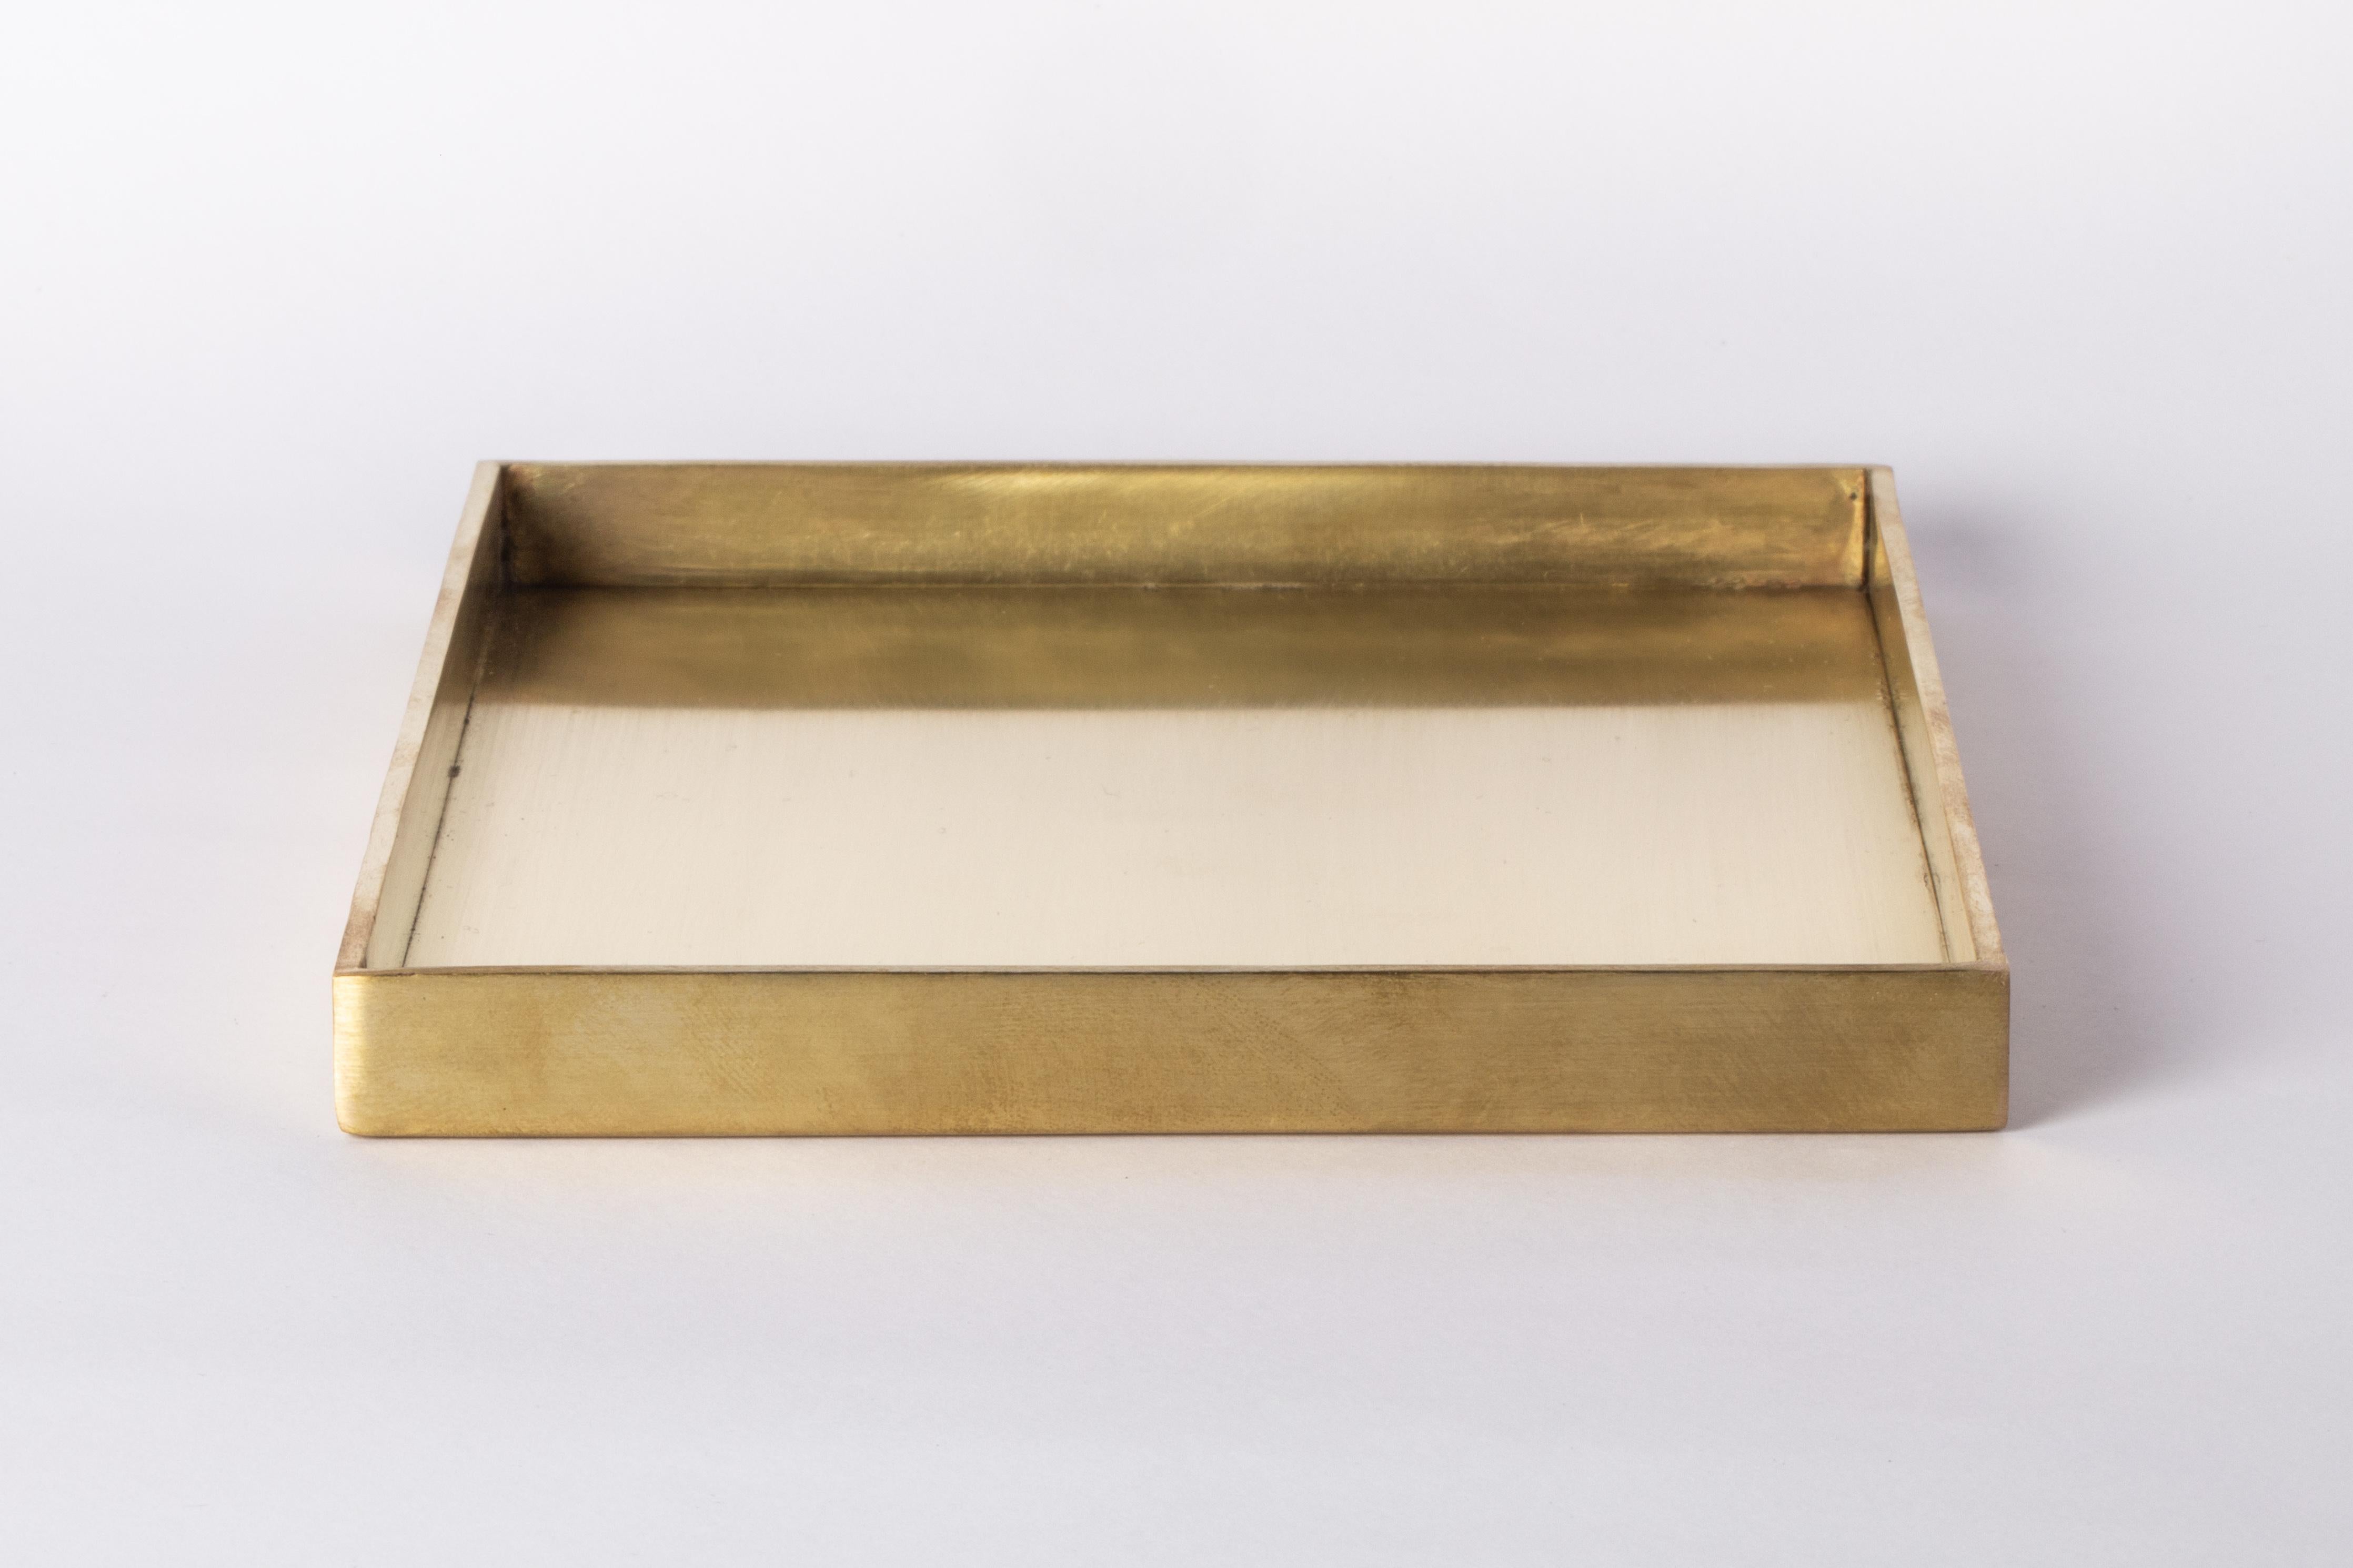 This tray is hand-made in brass. Crafted with meticulous care, it is a masterpiece of metalwork. Every inch is a testament to artisanal skill, with each section cut and shaped by hand.